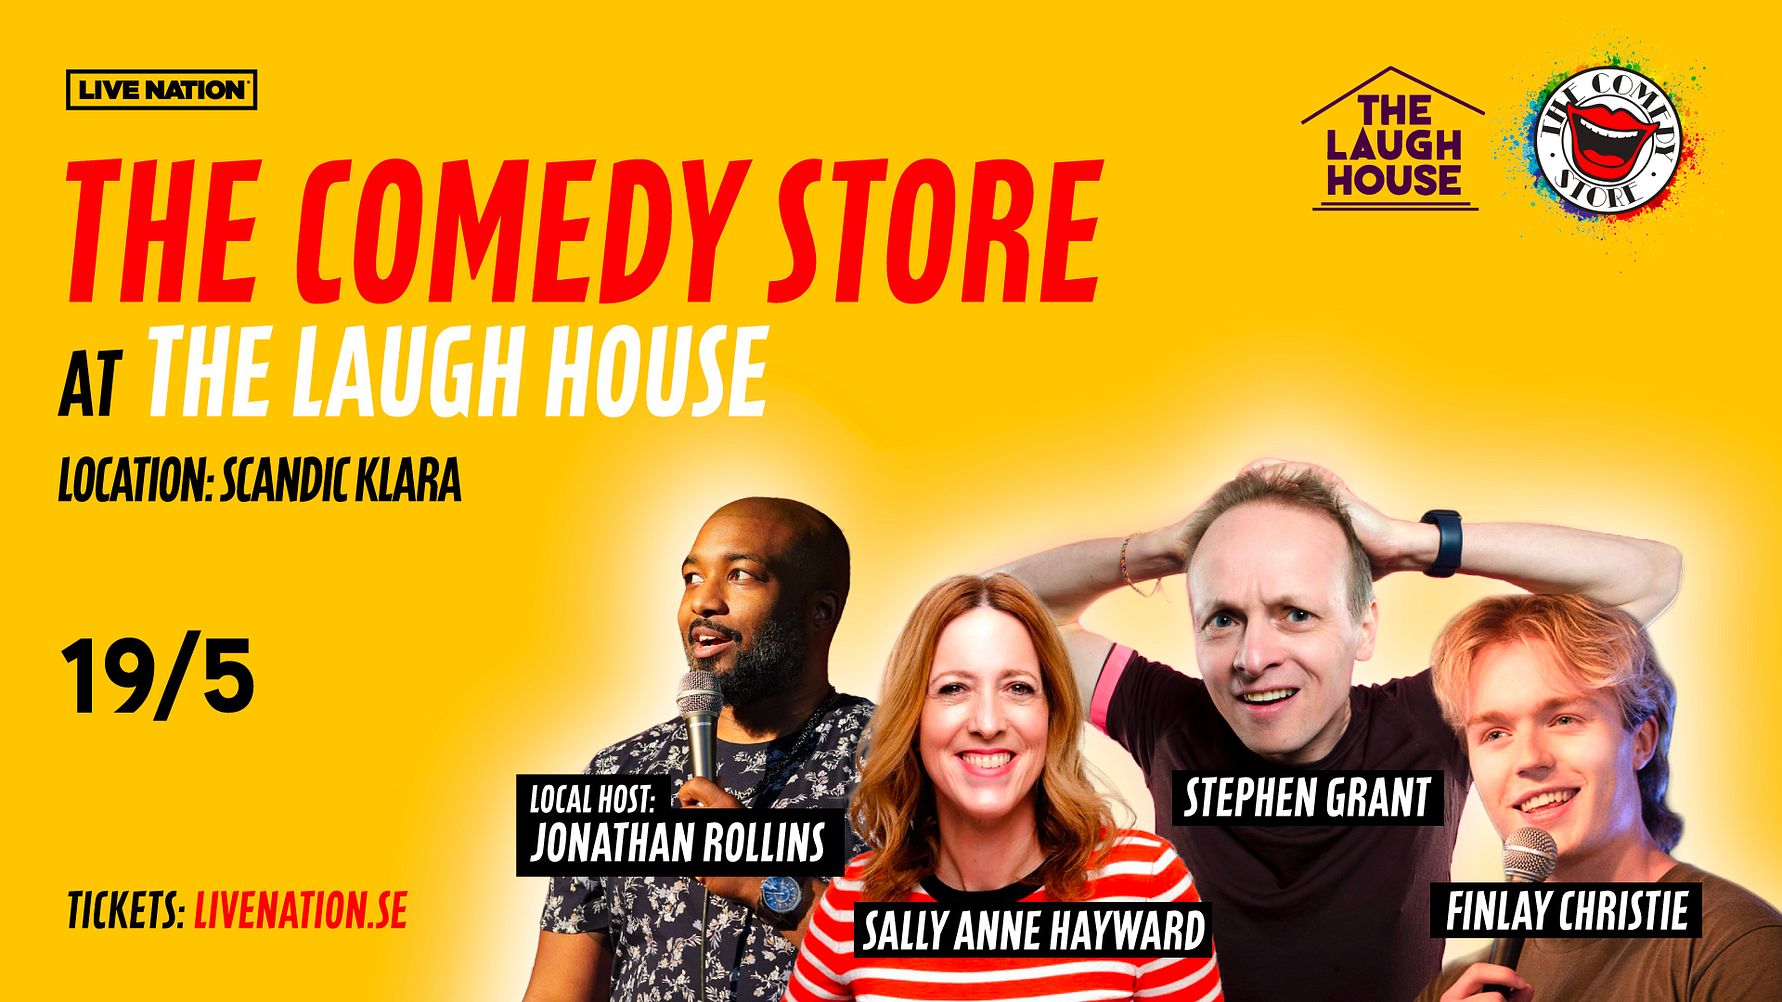 The Comedy Store returns to Sweden